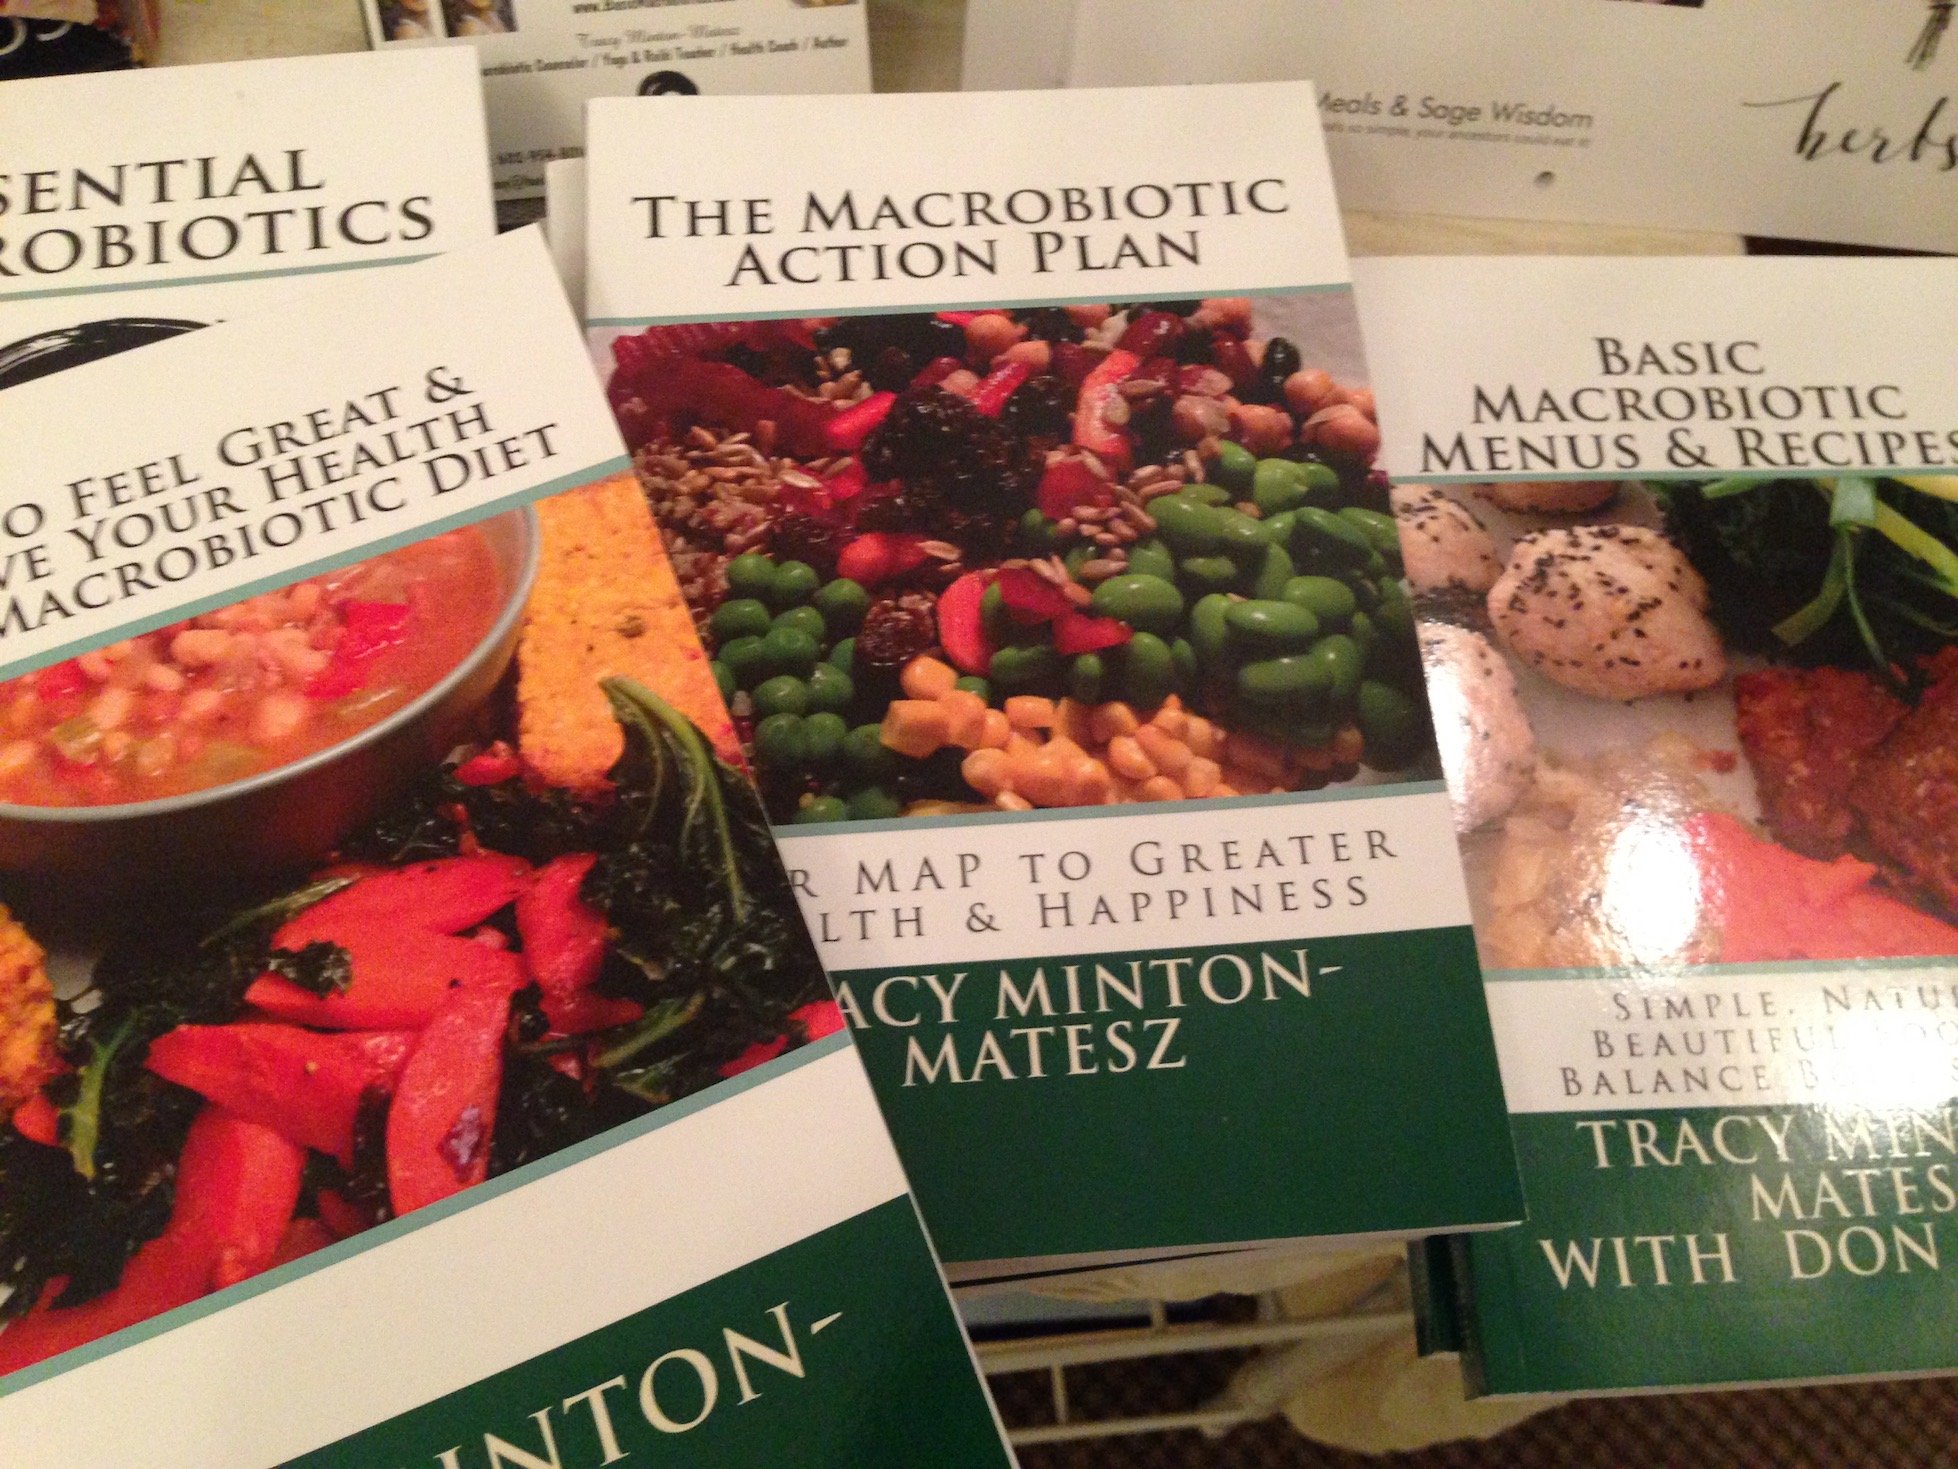 Macrobiotic Books written by Don and myself